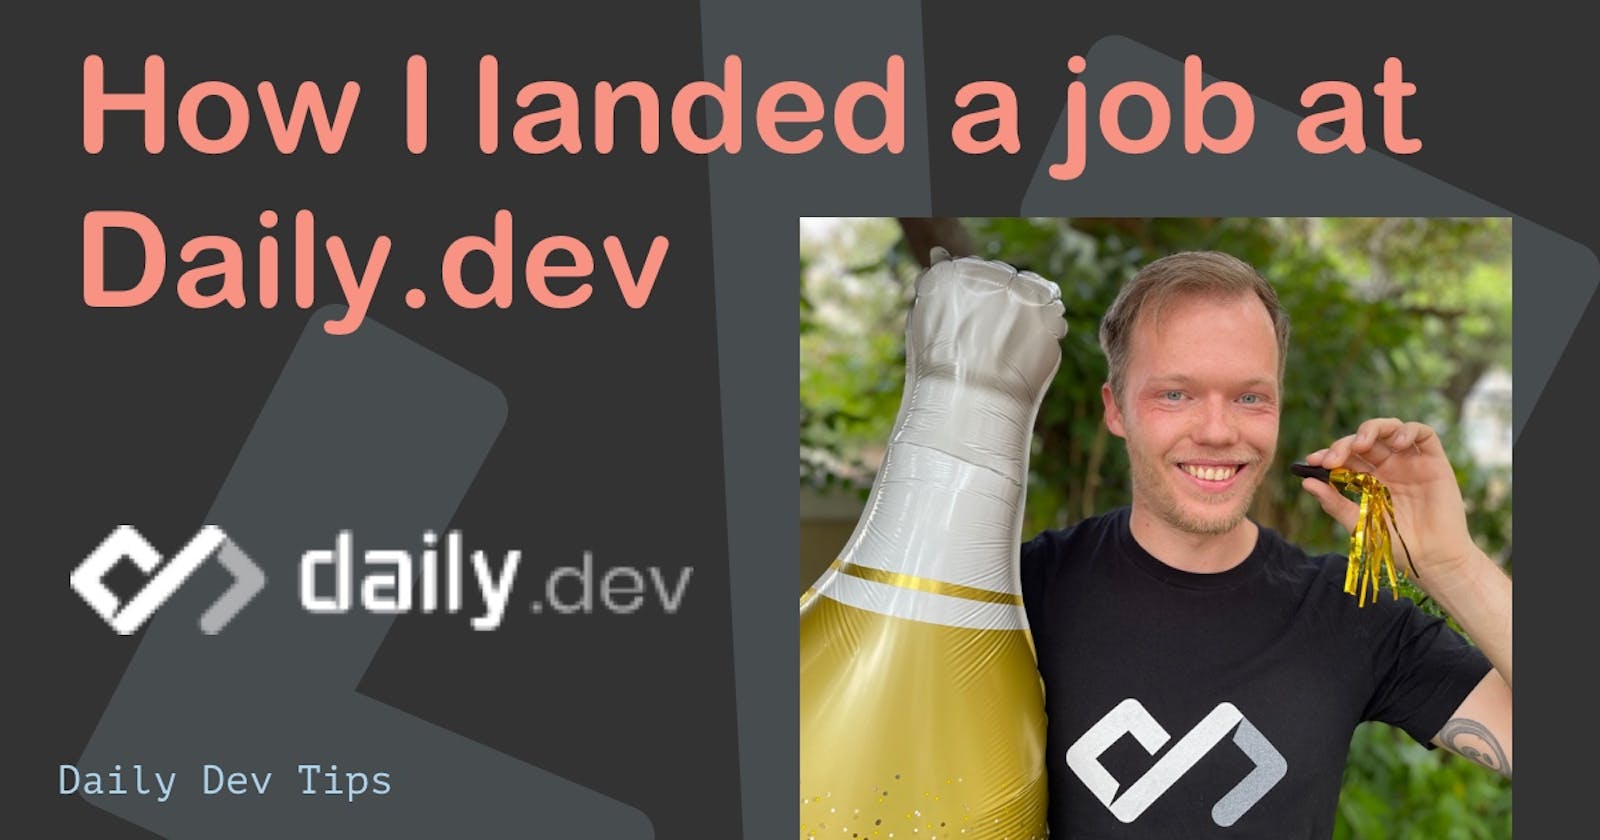 How I landed a job at Daily.dev